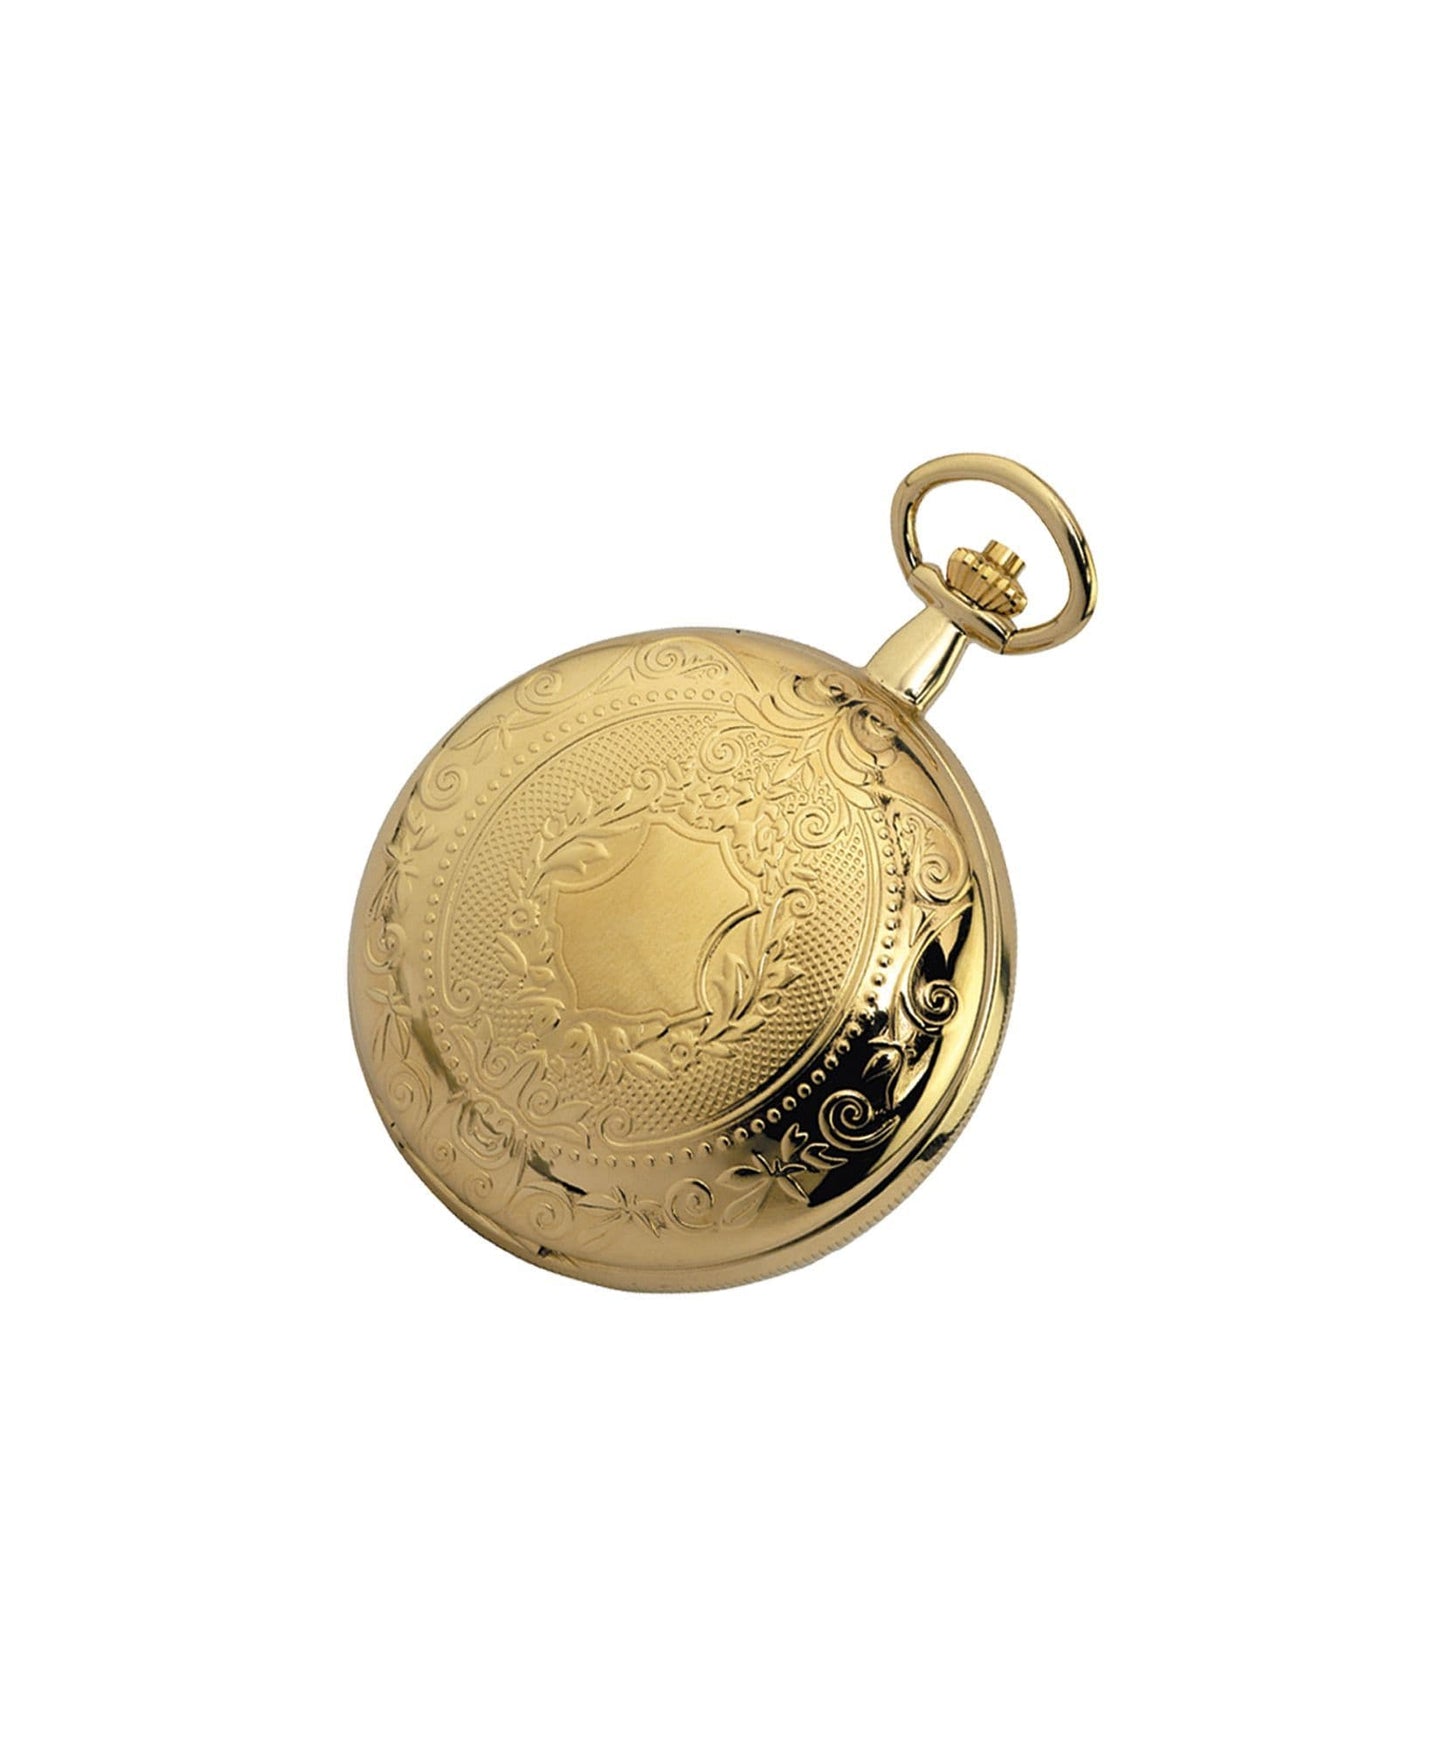 Mechanical Gold Plated Full Hunter Pocket Watch With Chain